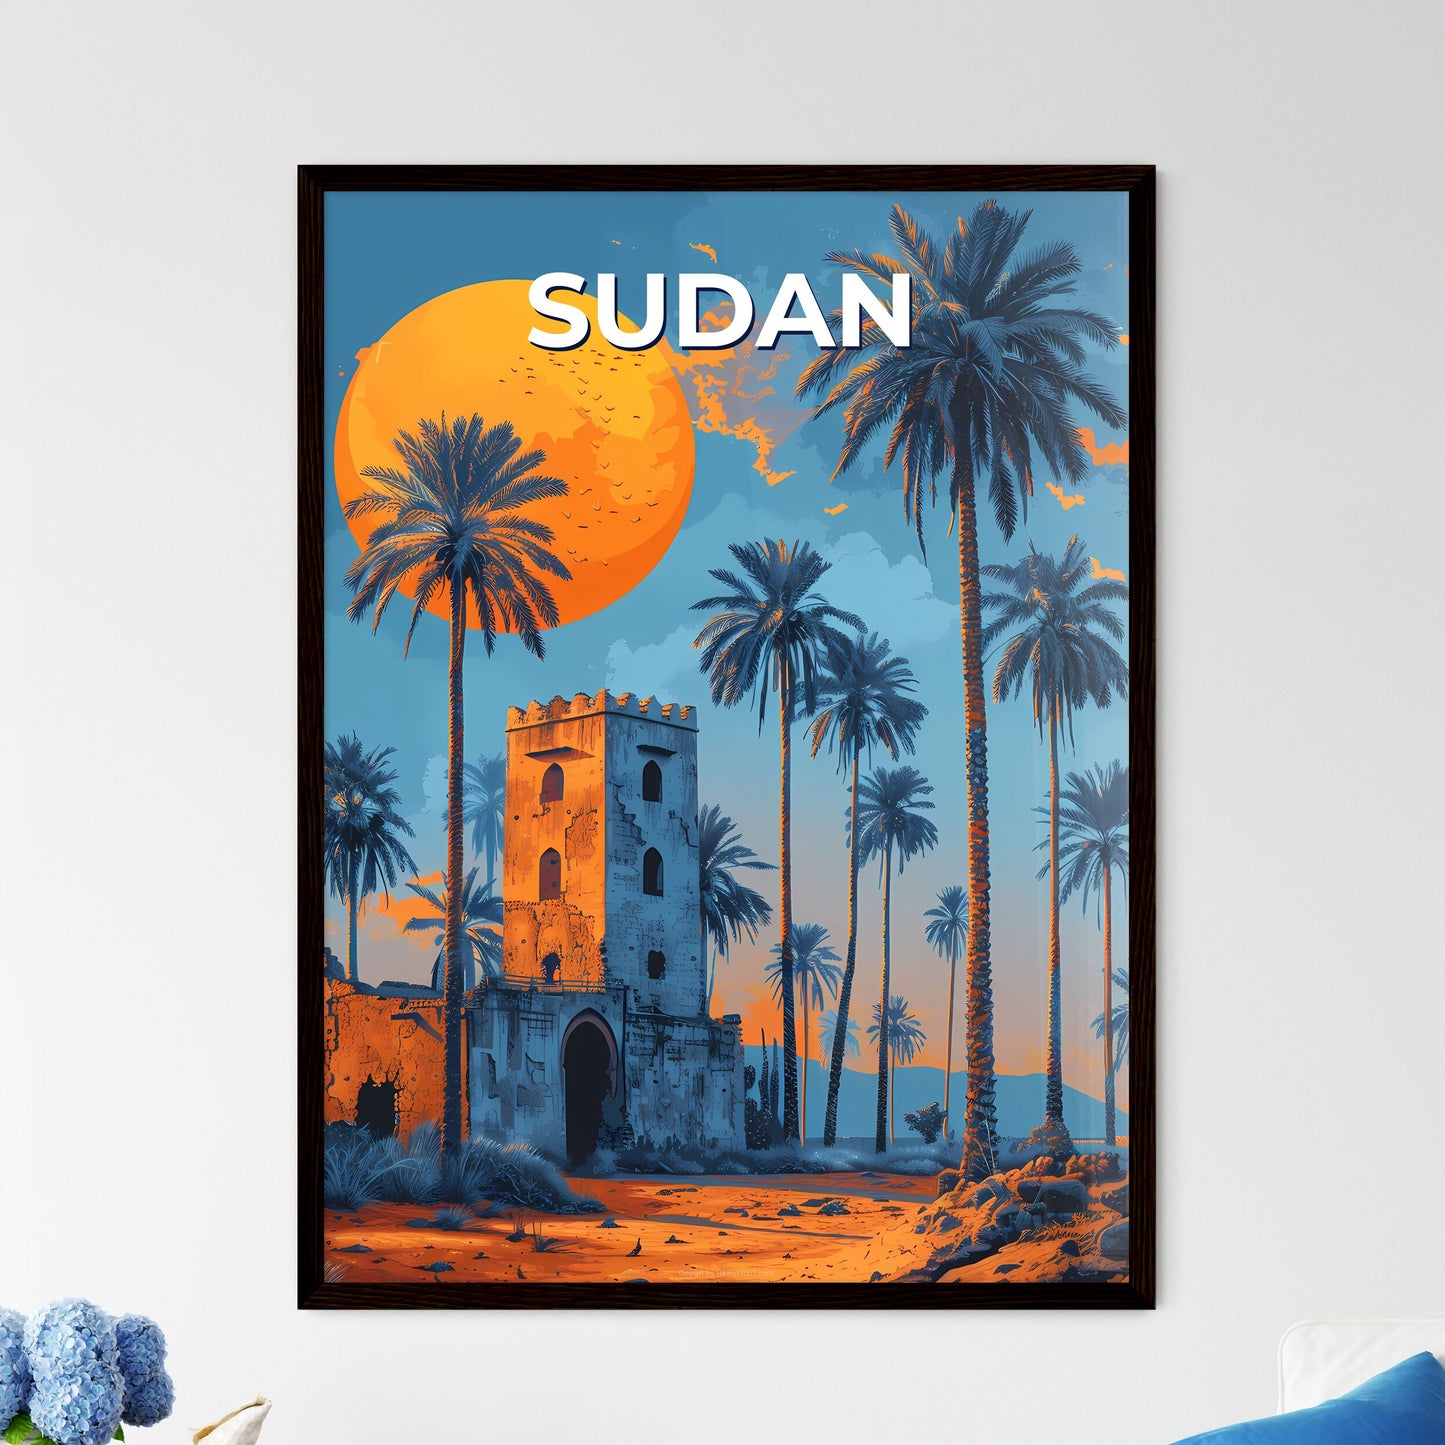 Sudan, Africa - Palm Tree and Tower Painting, Vibrant Art, African Culture, Travel, Souvenirs